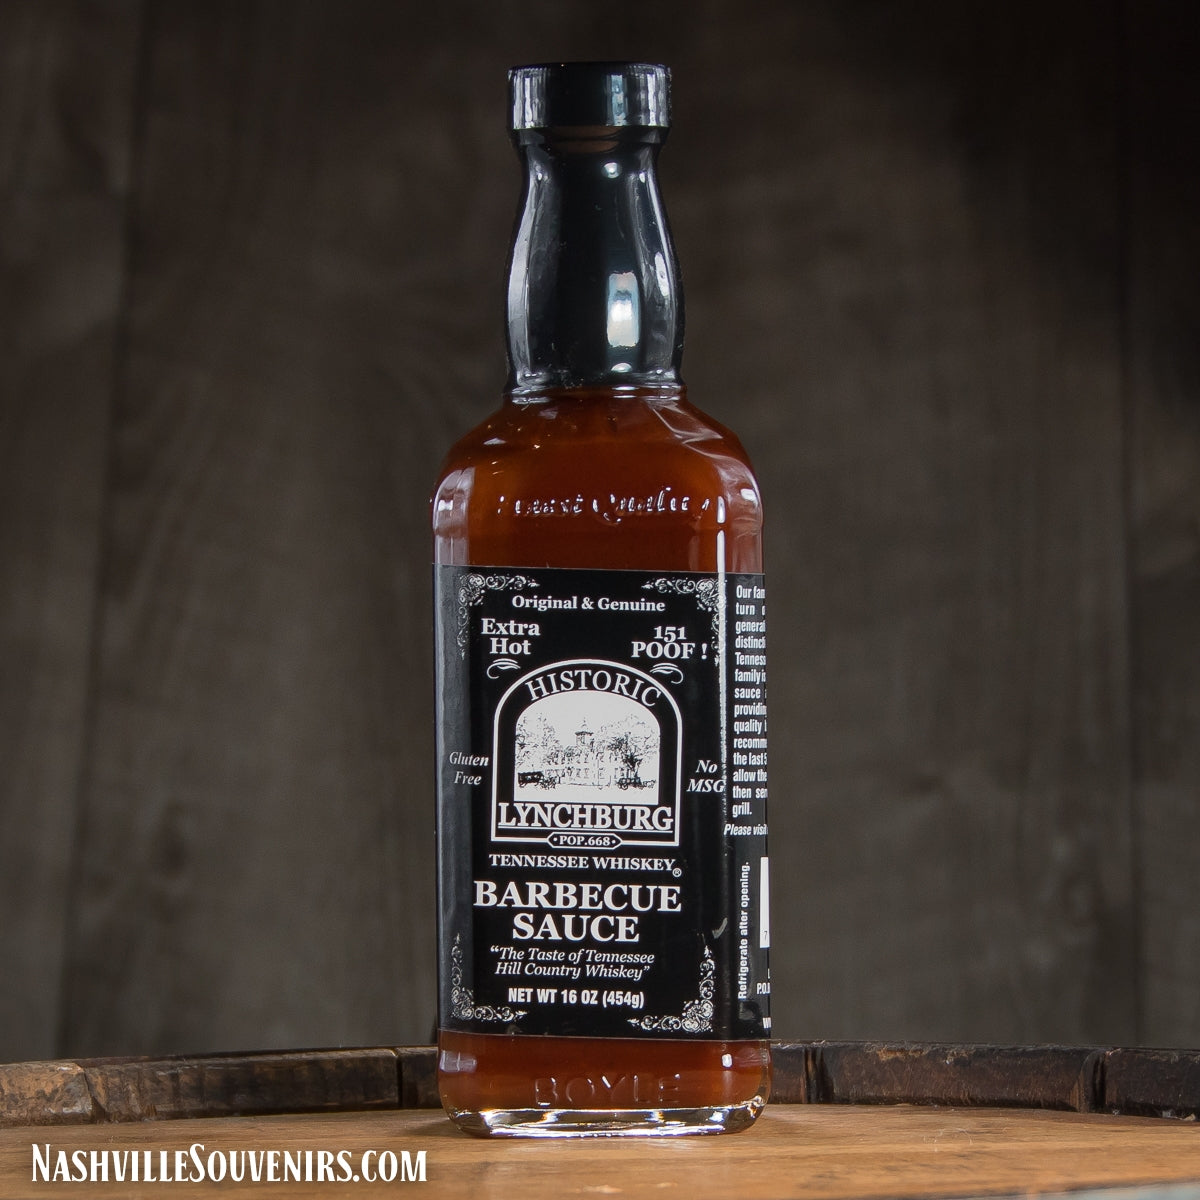 Buy Historic Lynchburg BBQ sauce that's extra hot with Jack Daniels Tennessee whiskey at NashvilleSouvenirs.com. FREE SHIPPING on all US orders over $75!